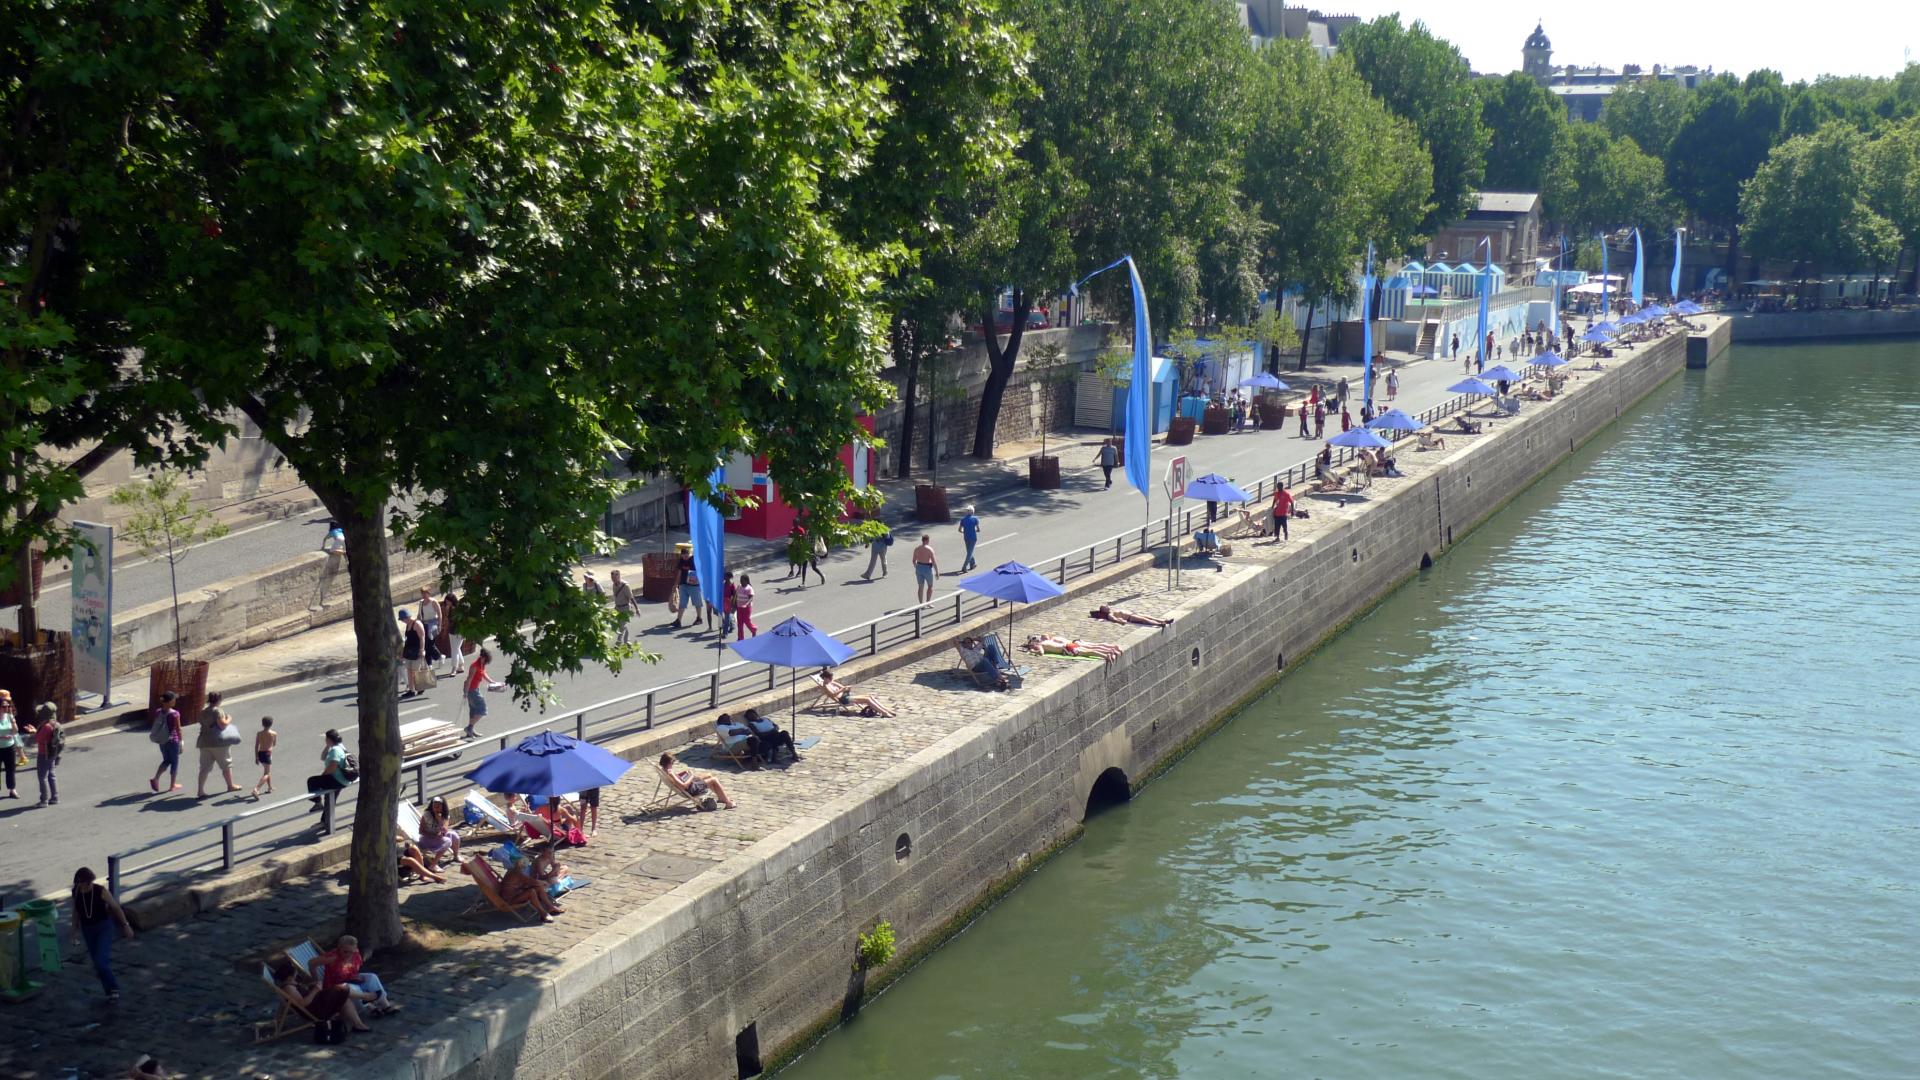 Paris Beaches; it all starts in early July